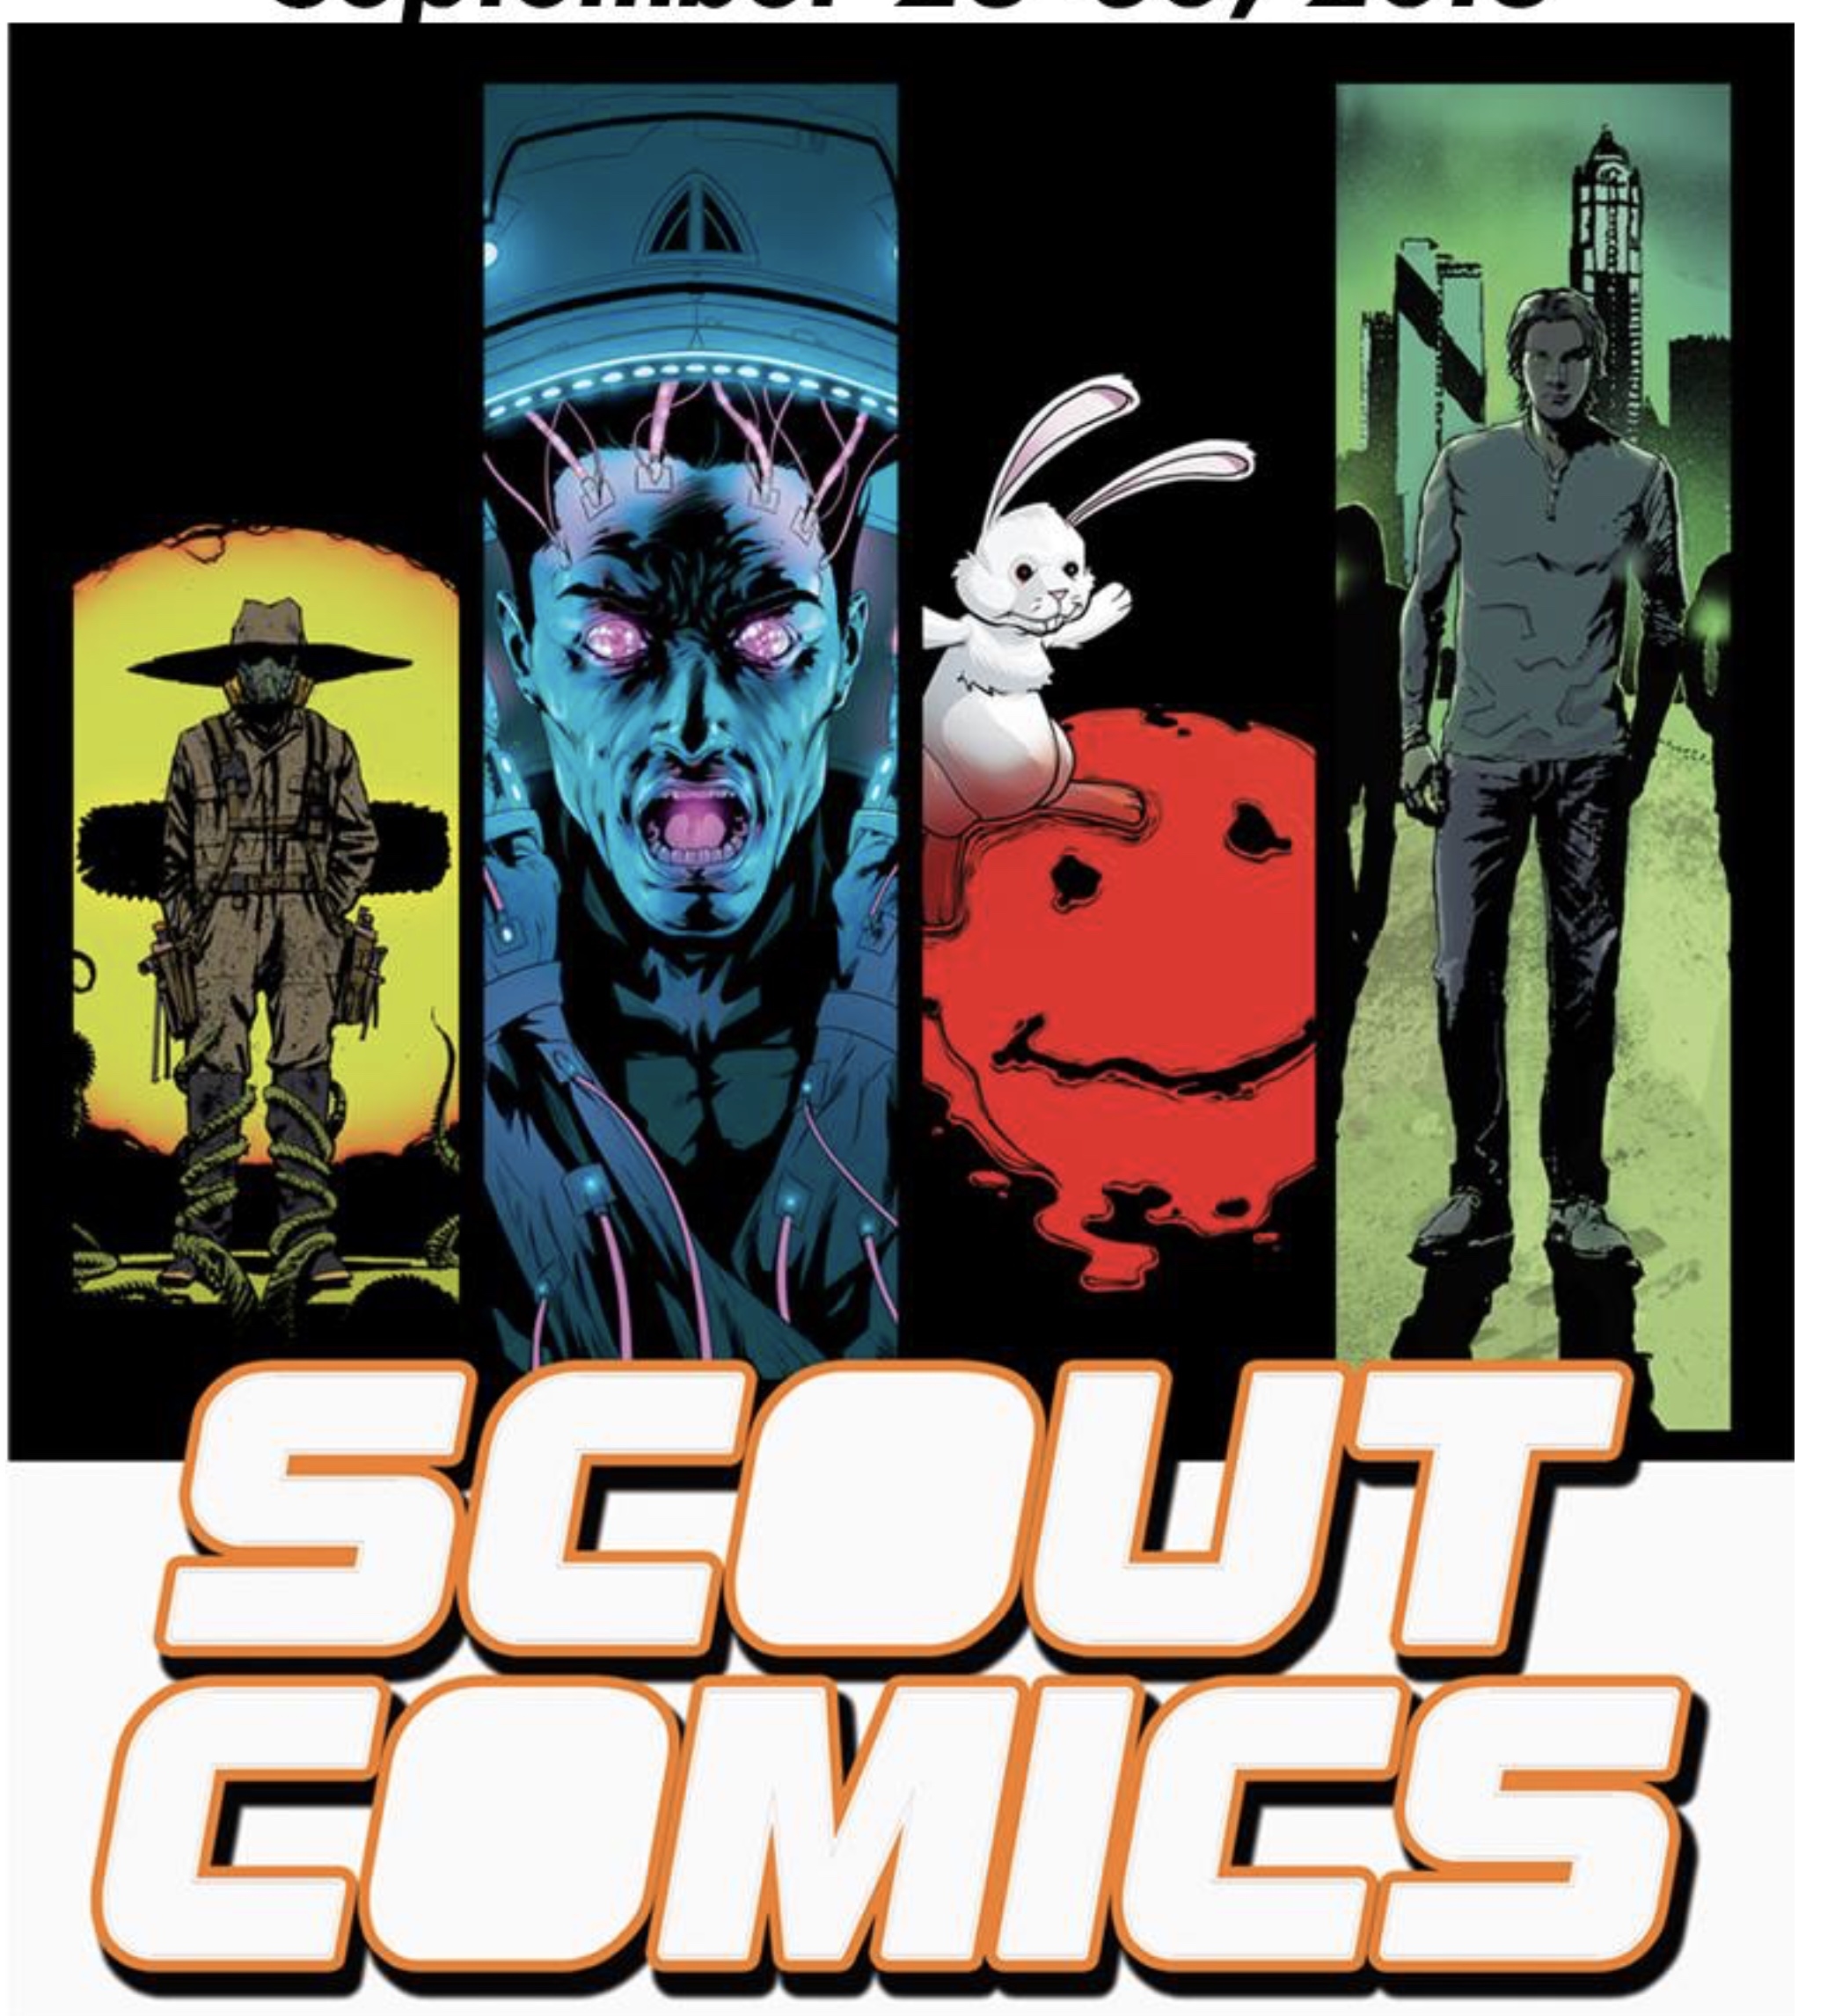 Scout Comics & Entertainment Inc is proud to announce that David Byrne and Charlie Stickney have been promoted to Co-Publishers